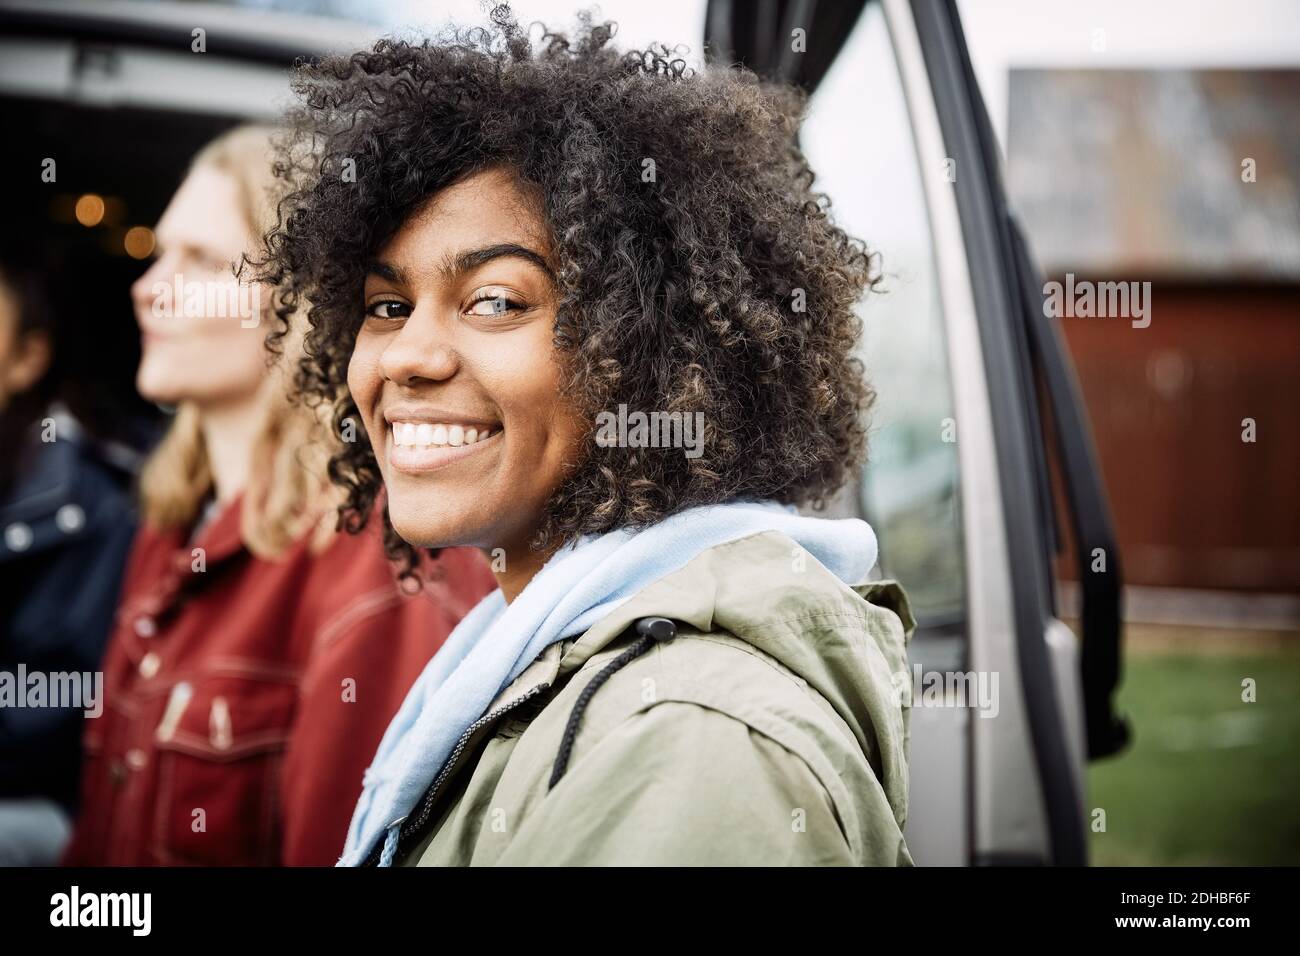 Portrait of smiling young woman with curly hair standing with friend by car Stock Photo